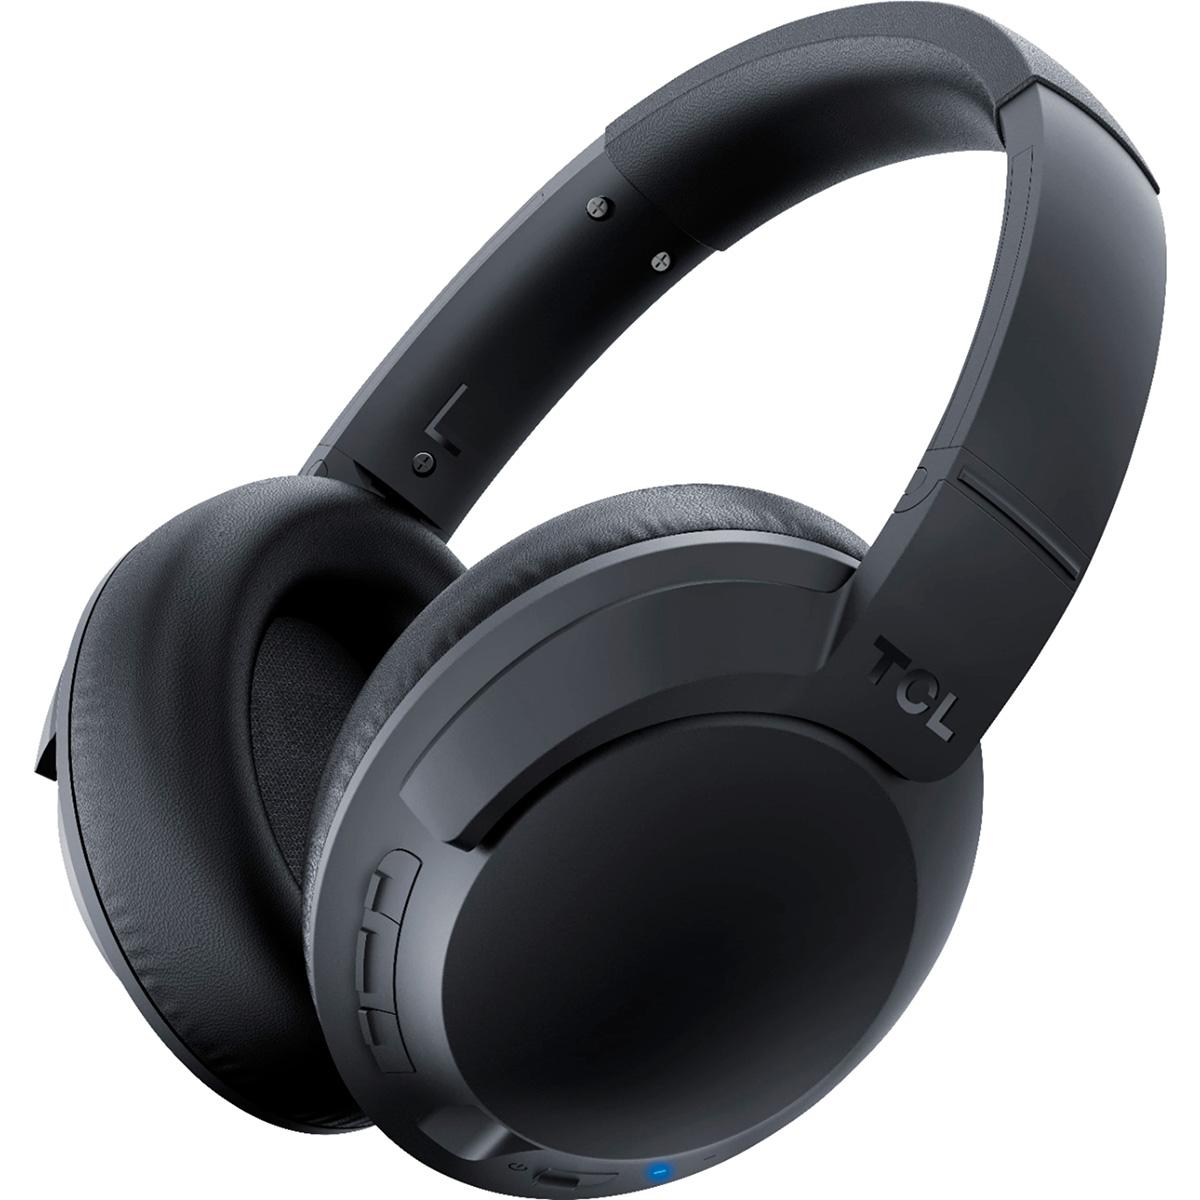 TCL Wireless Noise Cancelling Over-the-Ear Headphones for $69.99 Shipped